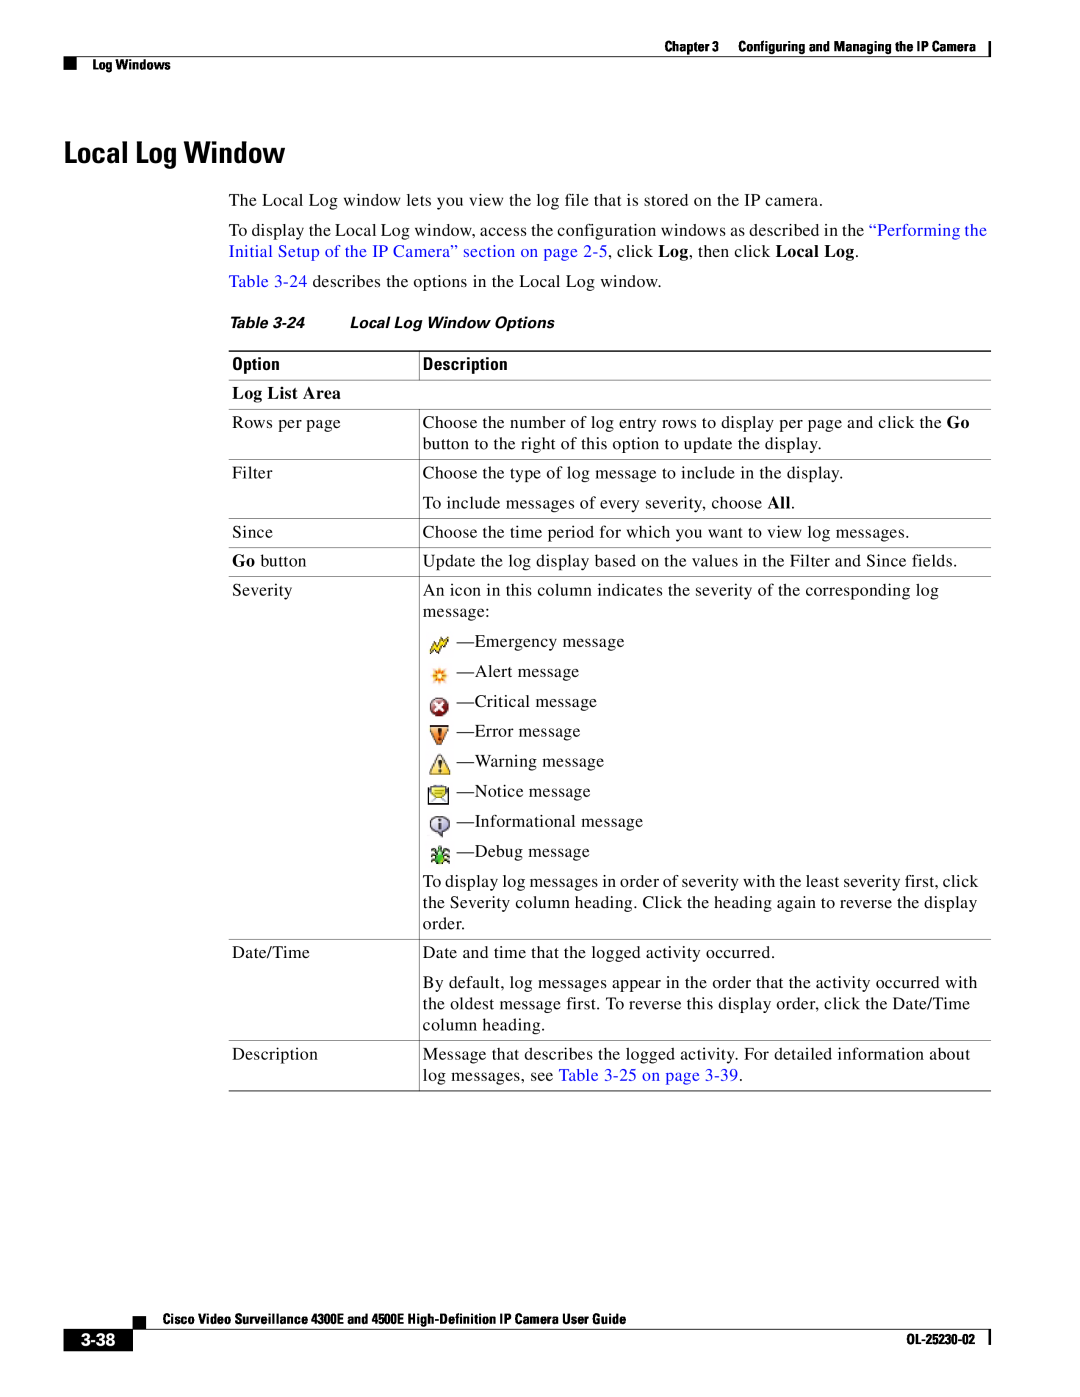 Cisco Systems 4300E manual Local Log Window, Log List Area, log messages, see -25on page, 3-38 